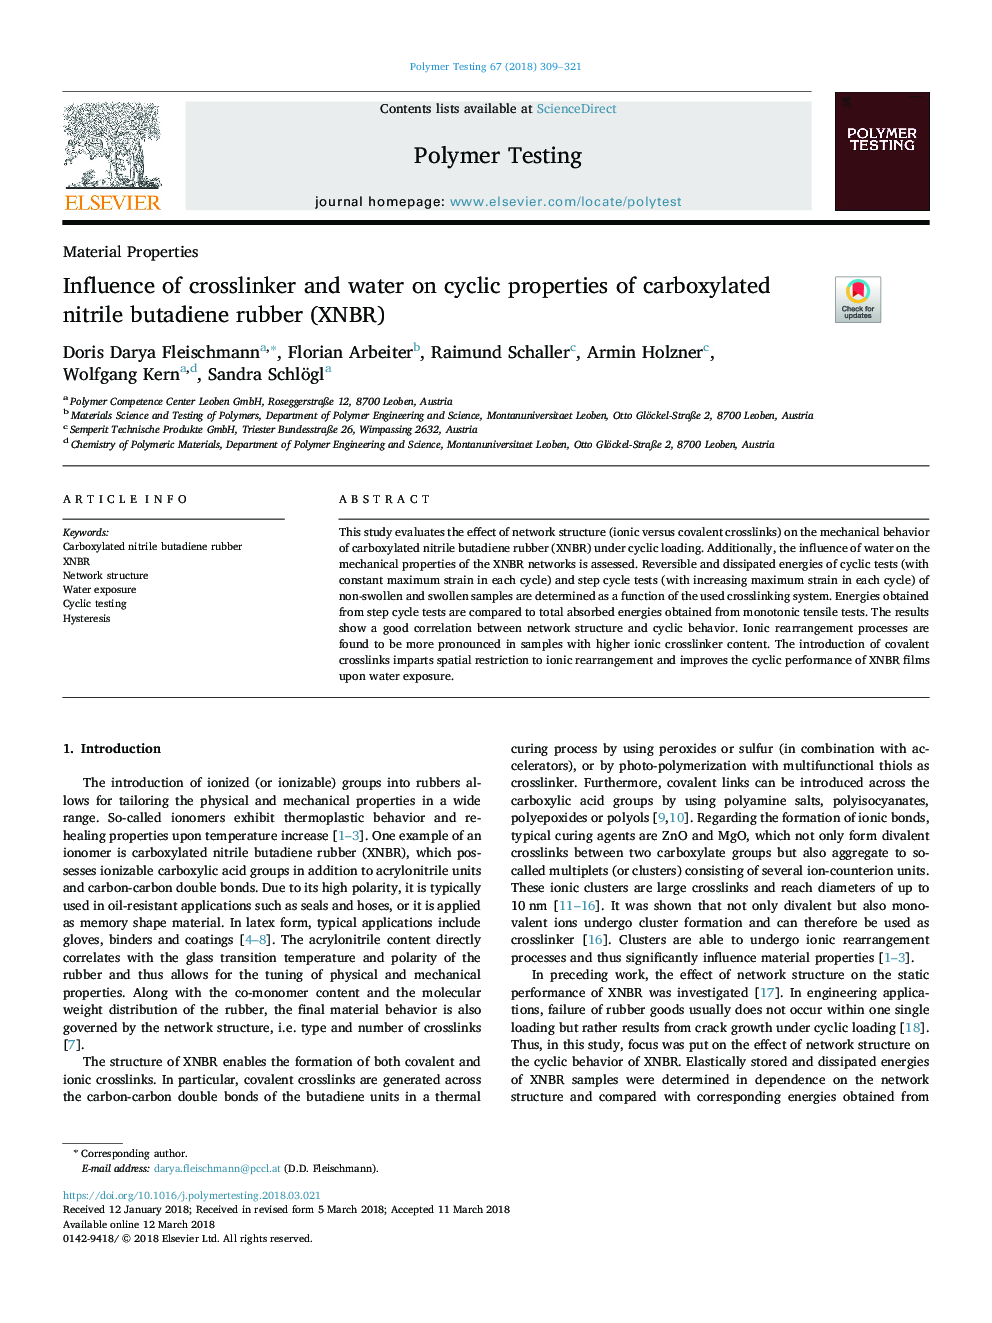 Influence of crosslinker and water on cyclic properties of carboxylated nitrile butadiene rubber (XNBR)